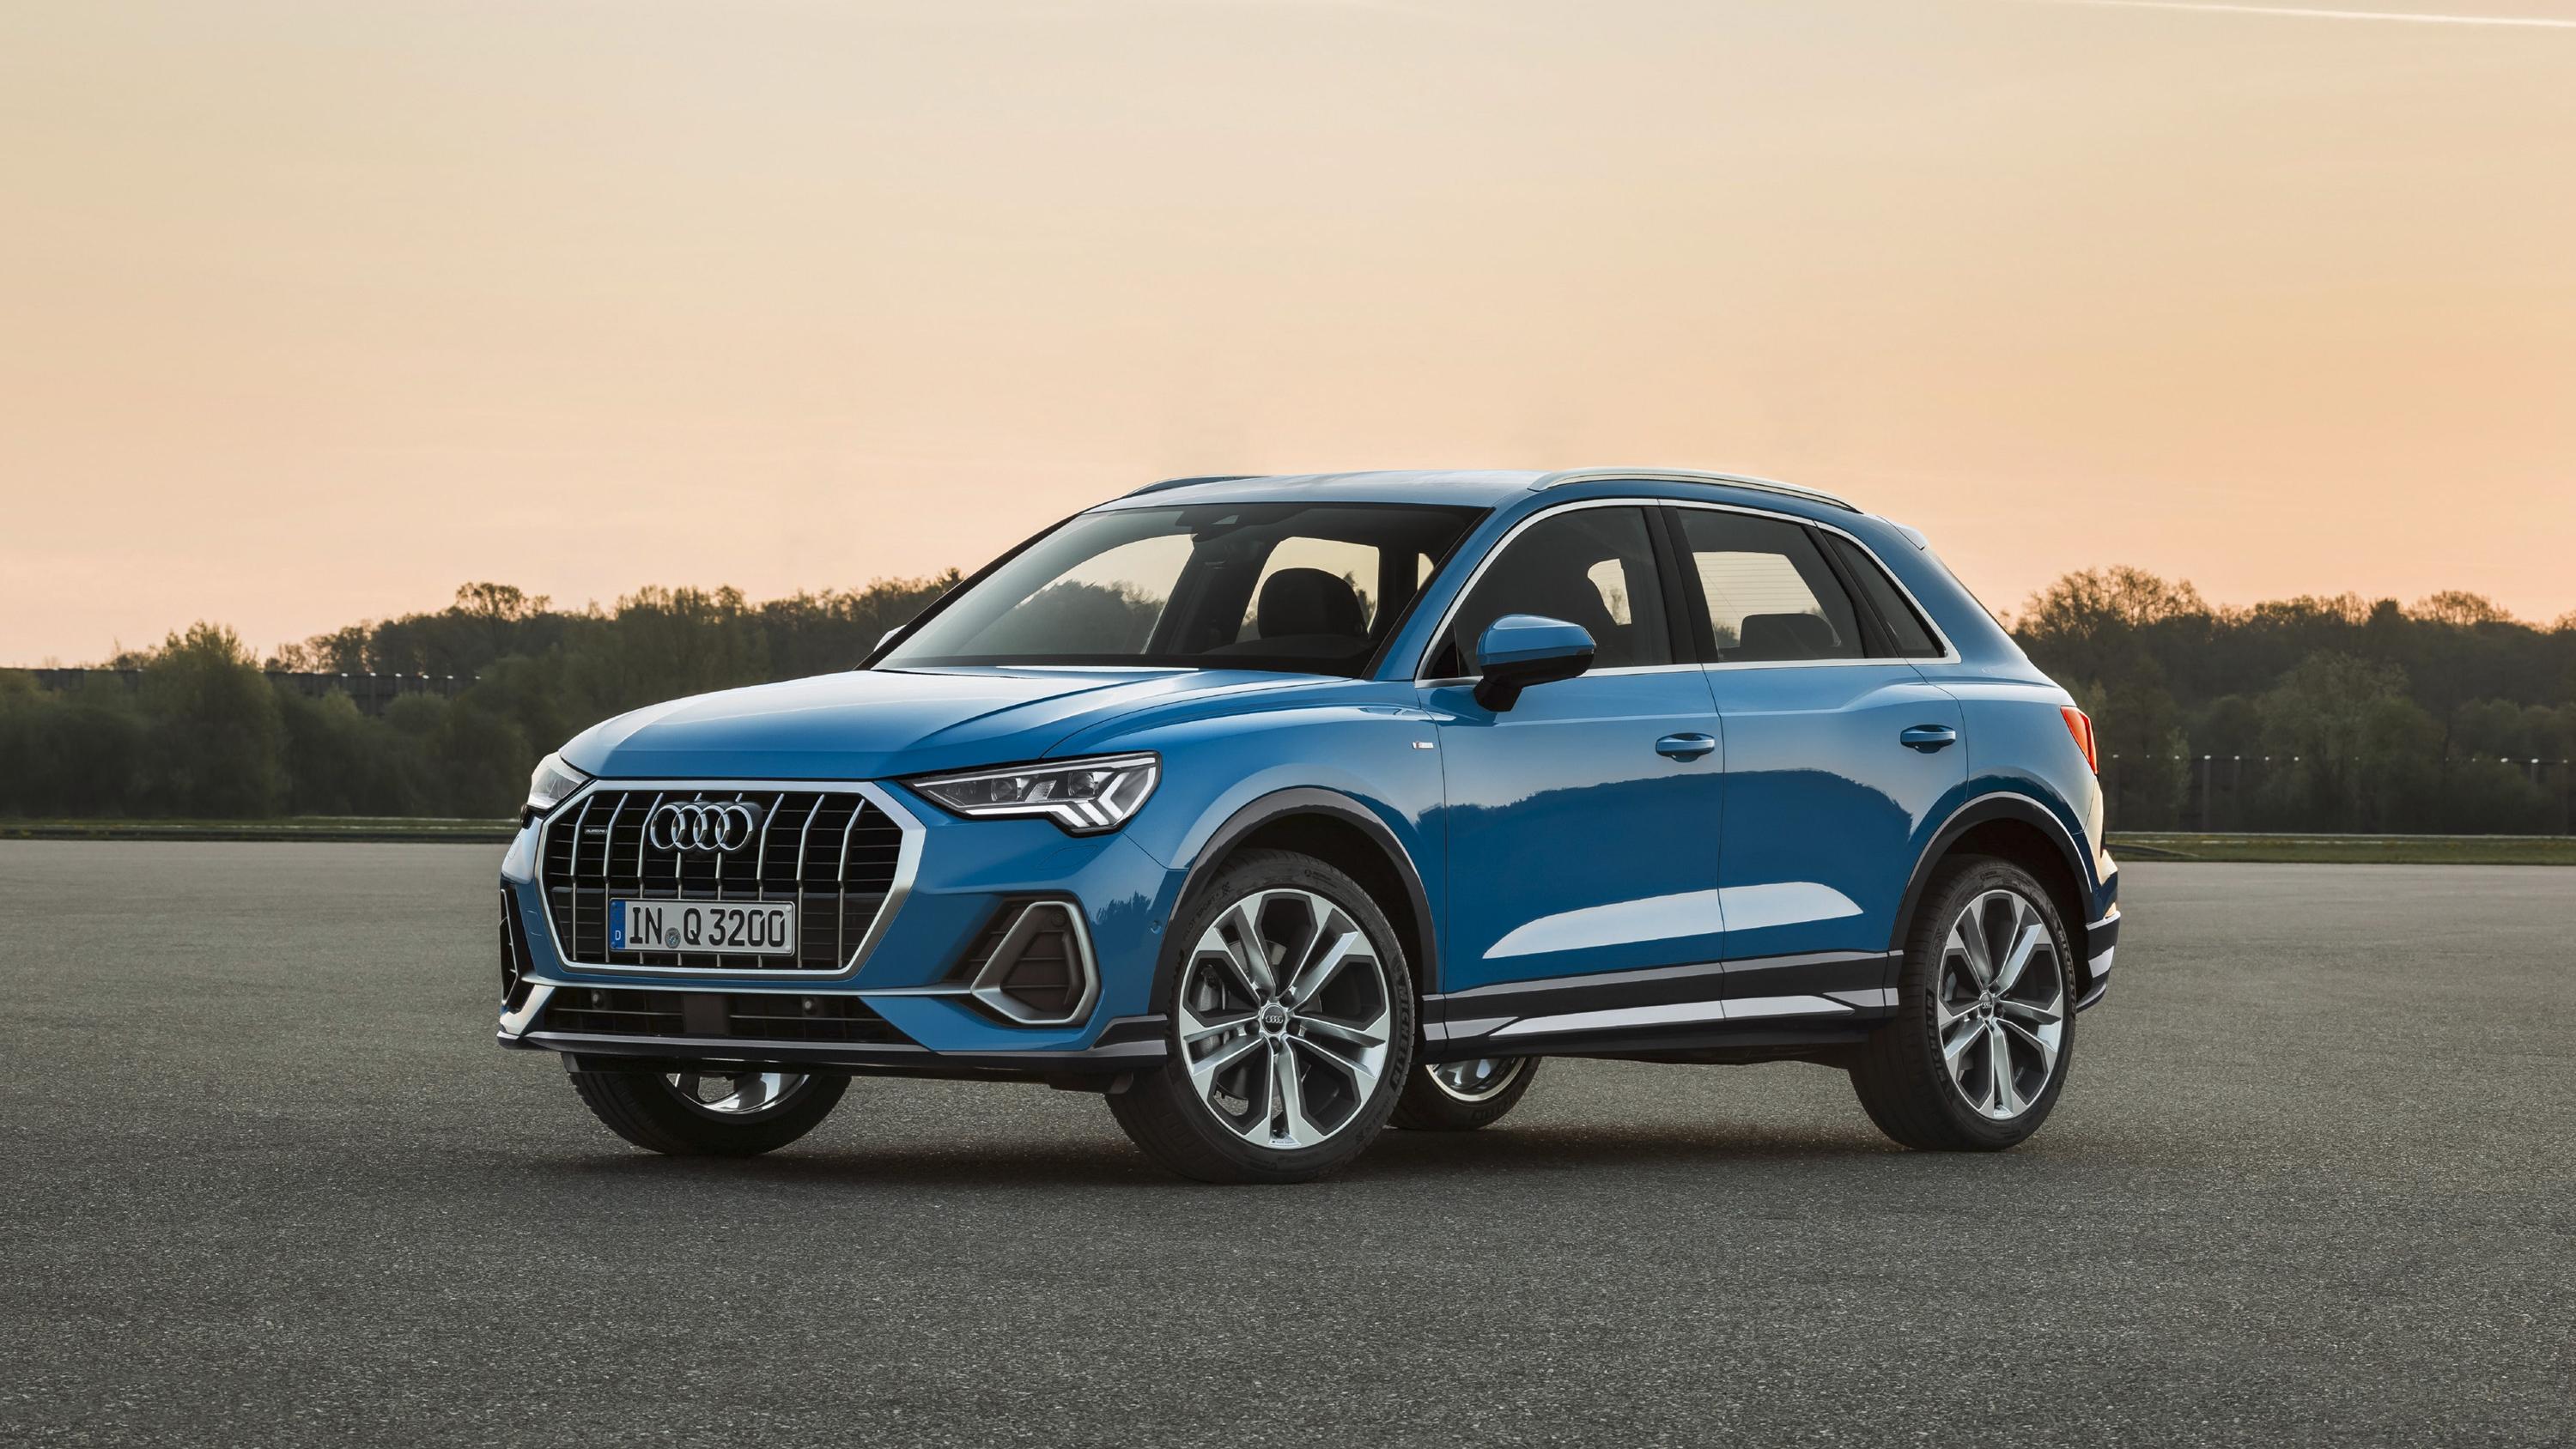 Audi Q3 Reviews, Specs, Prices, Photo And Videos